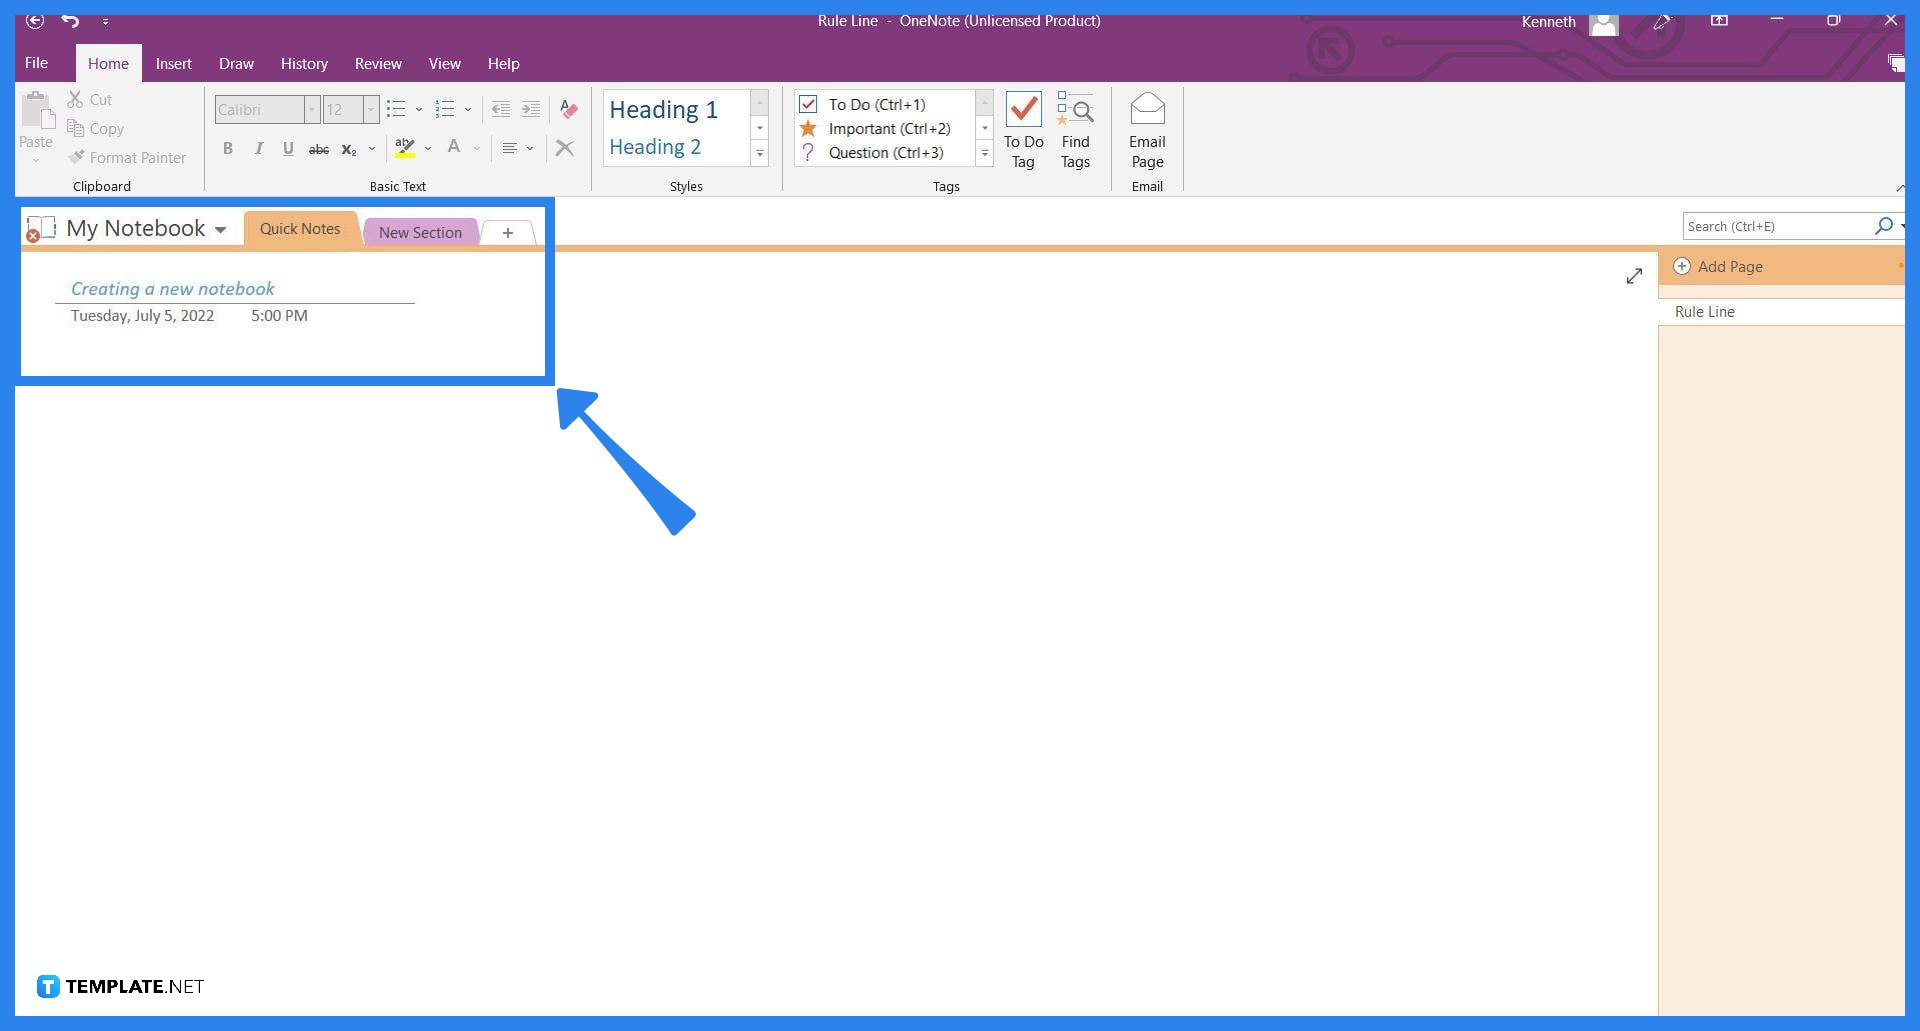 how-to-add-rule-lines-in-microsoft-onenote-step-01